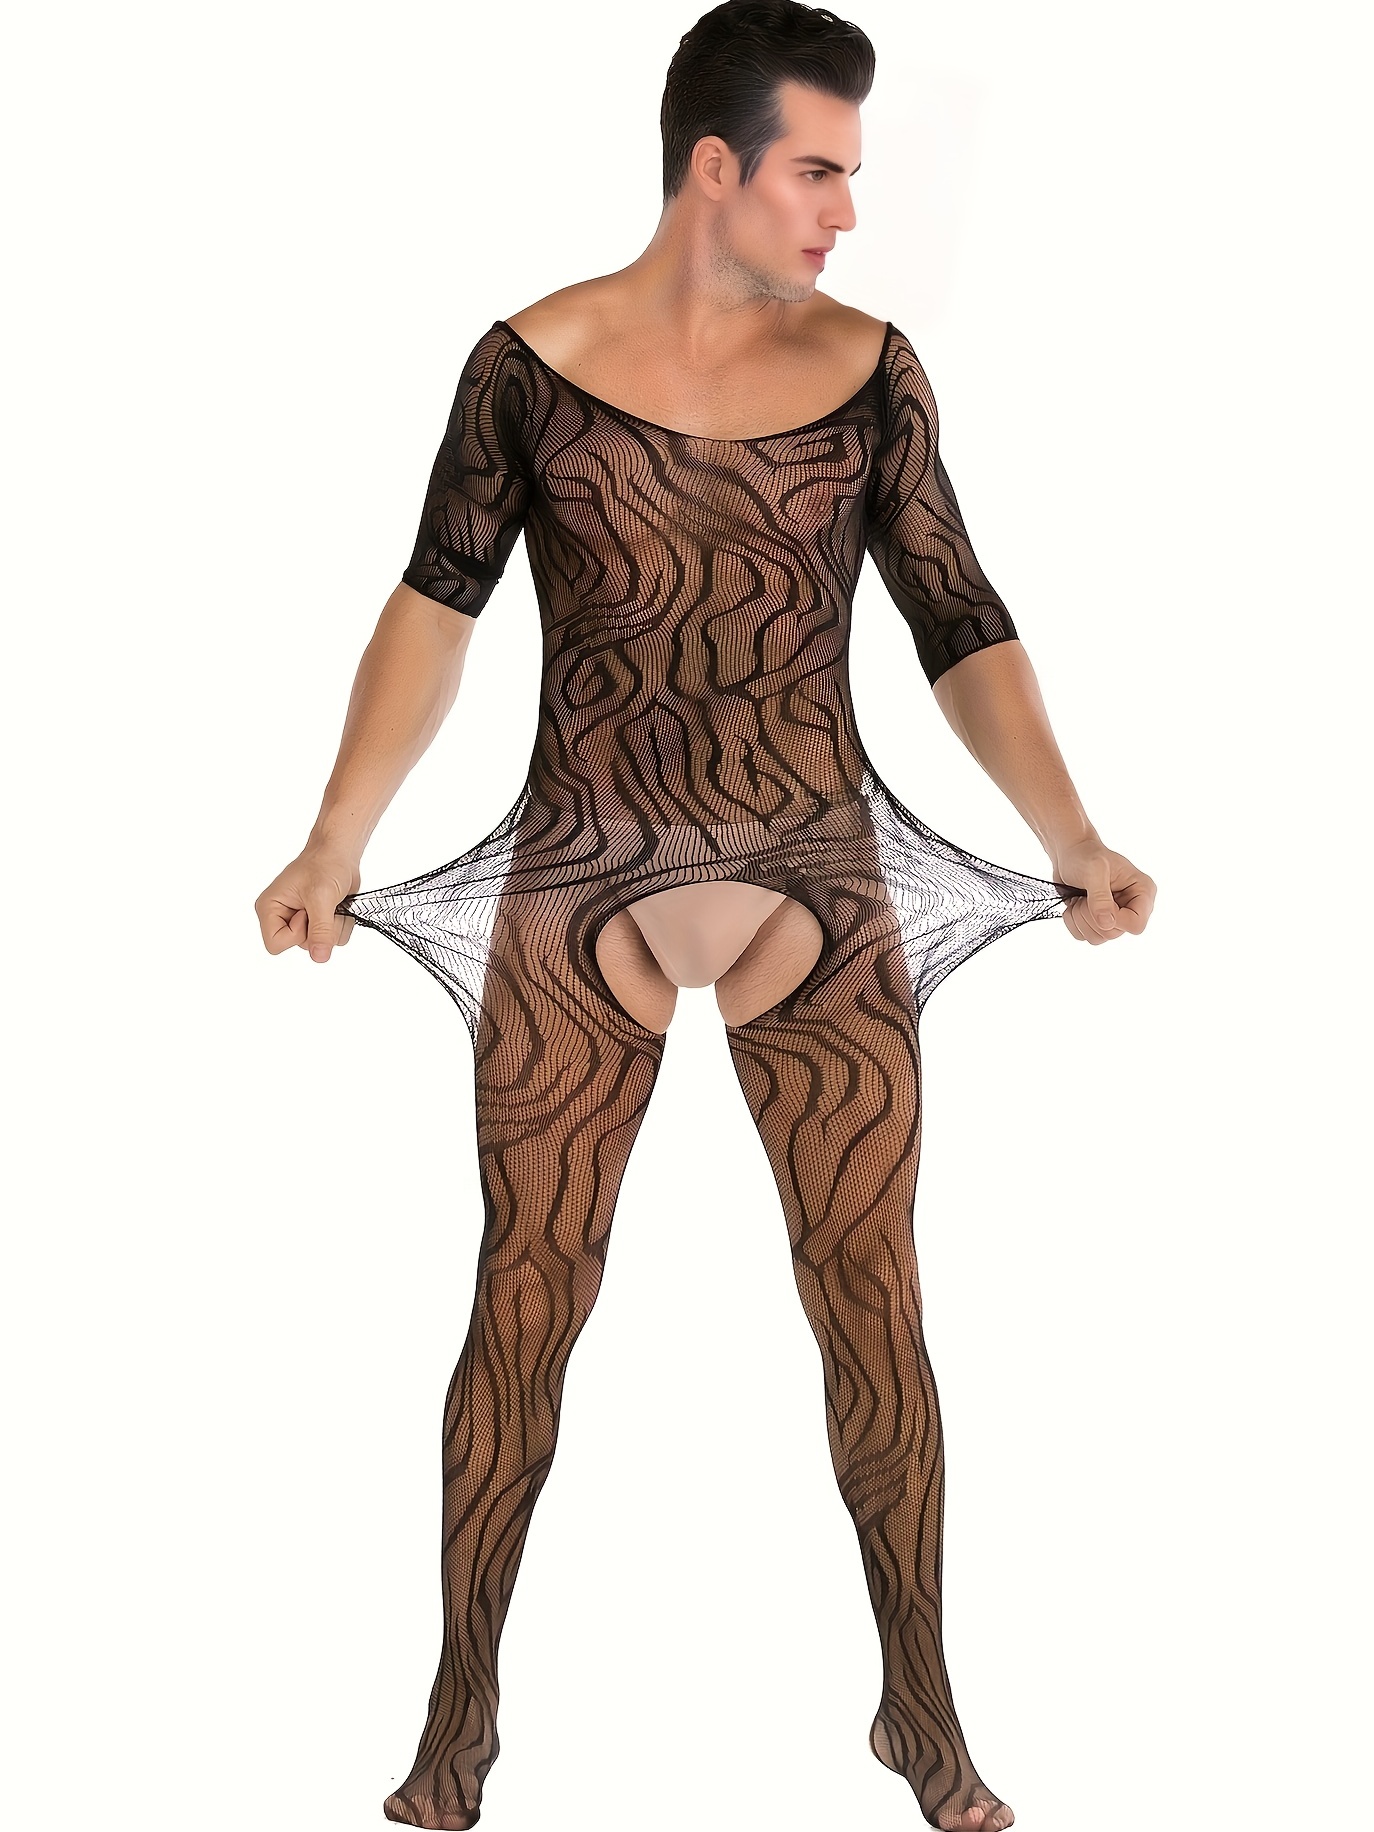 Women Sheer Jumpsuit Body Stockings Bodysuit Lingerie Catsuit with